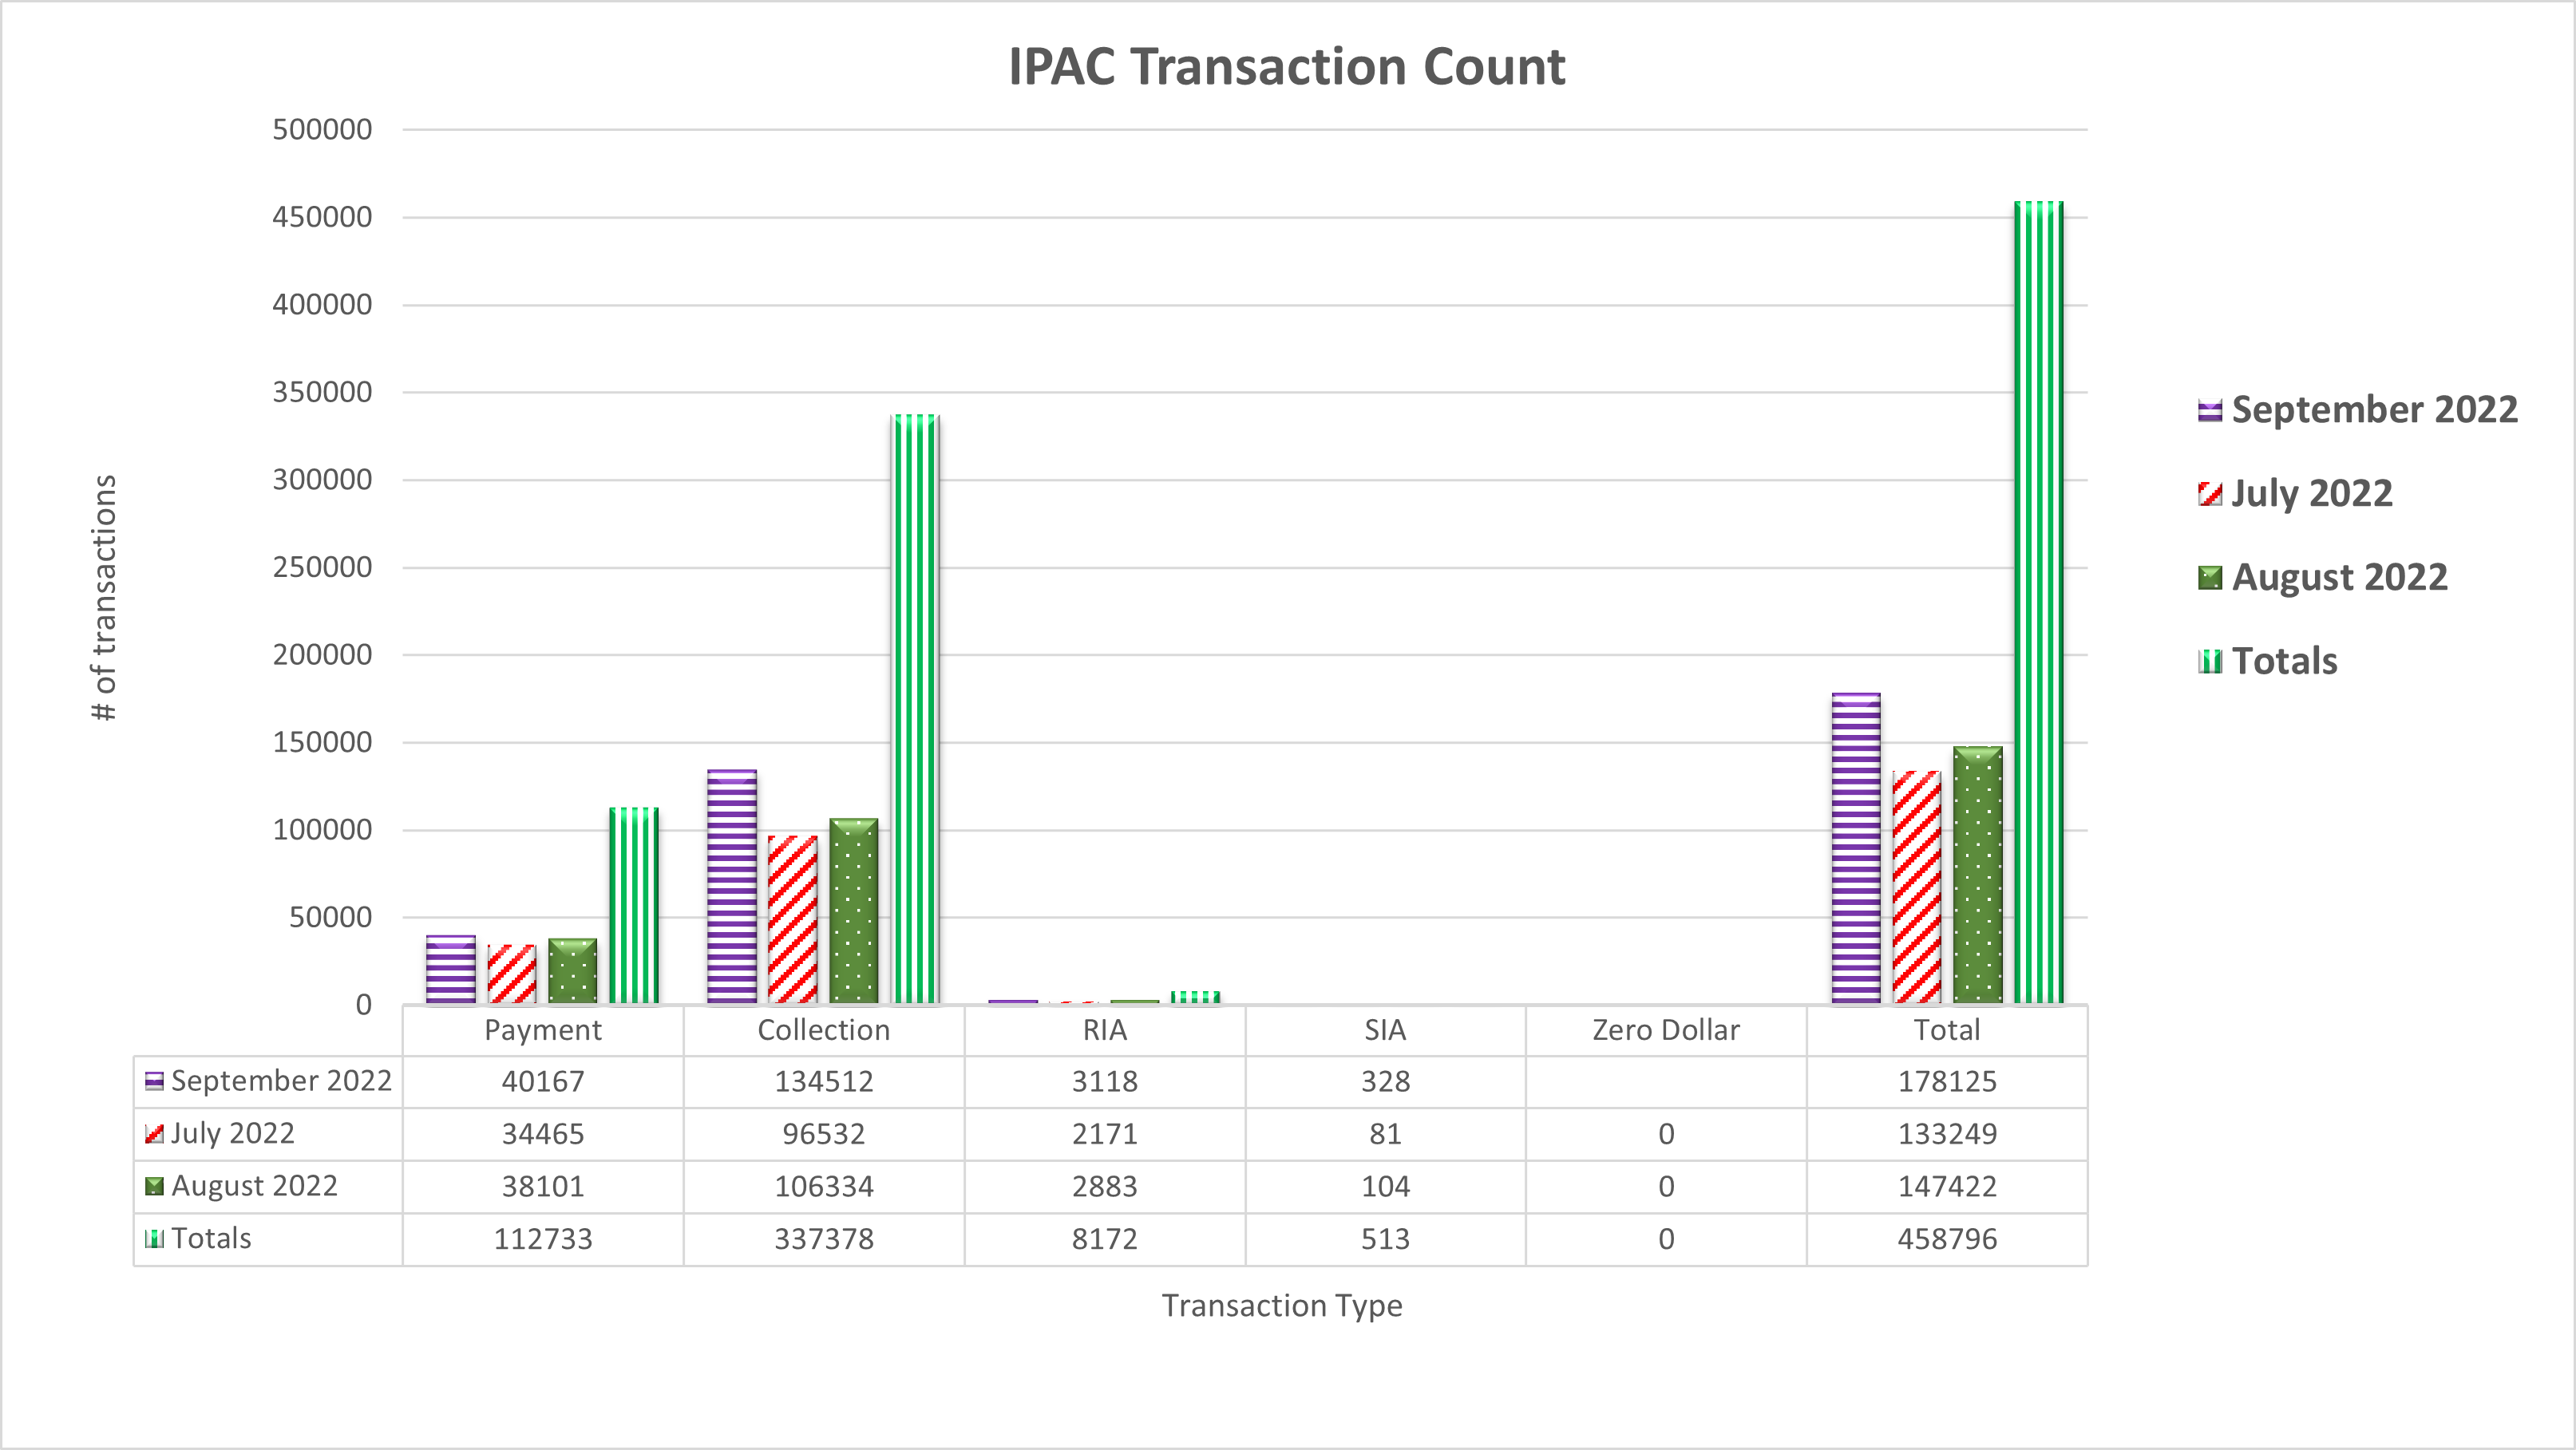 IPAC Transaction Count July 2022 through September 2022